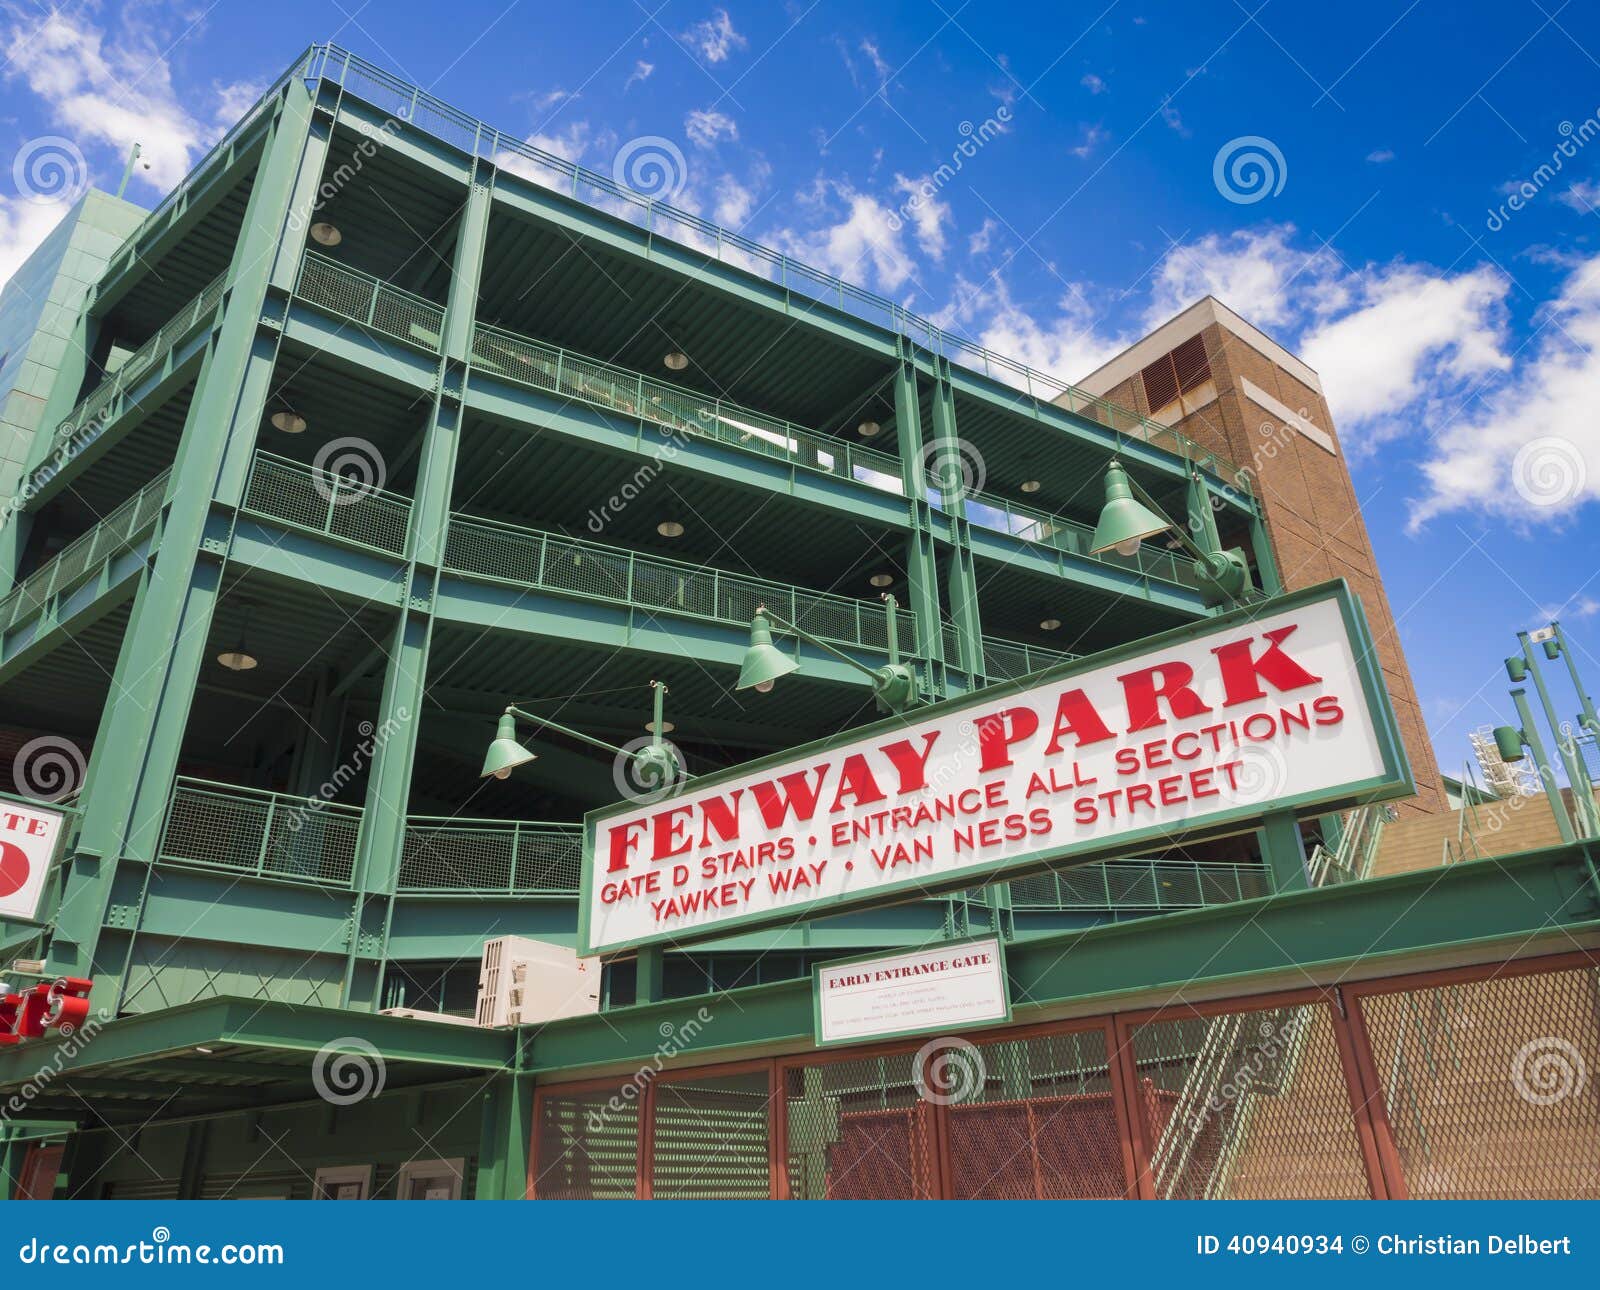 Fenway Park entrance editorial stock image. Image of architecture - 40940934